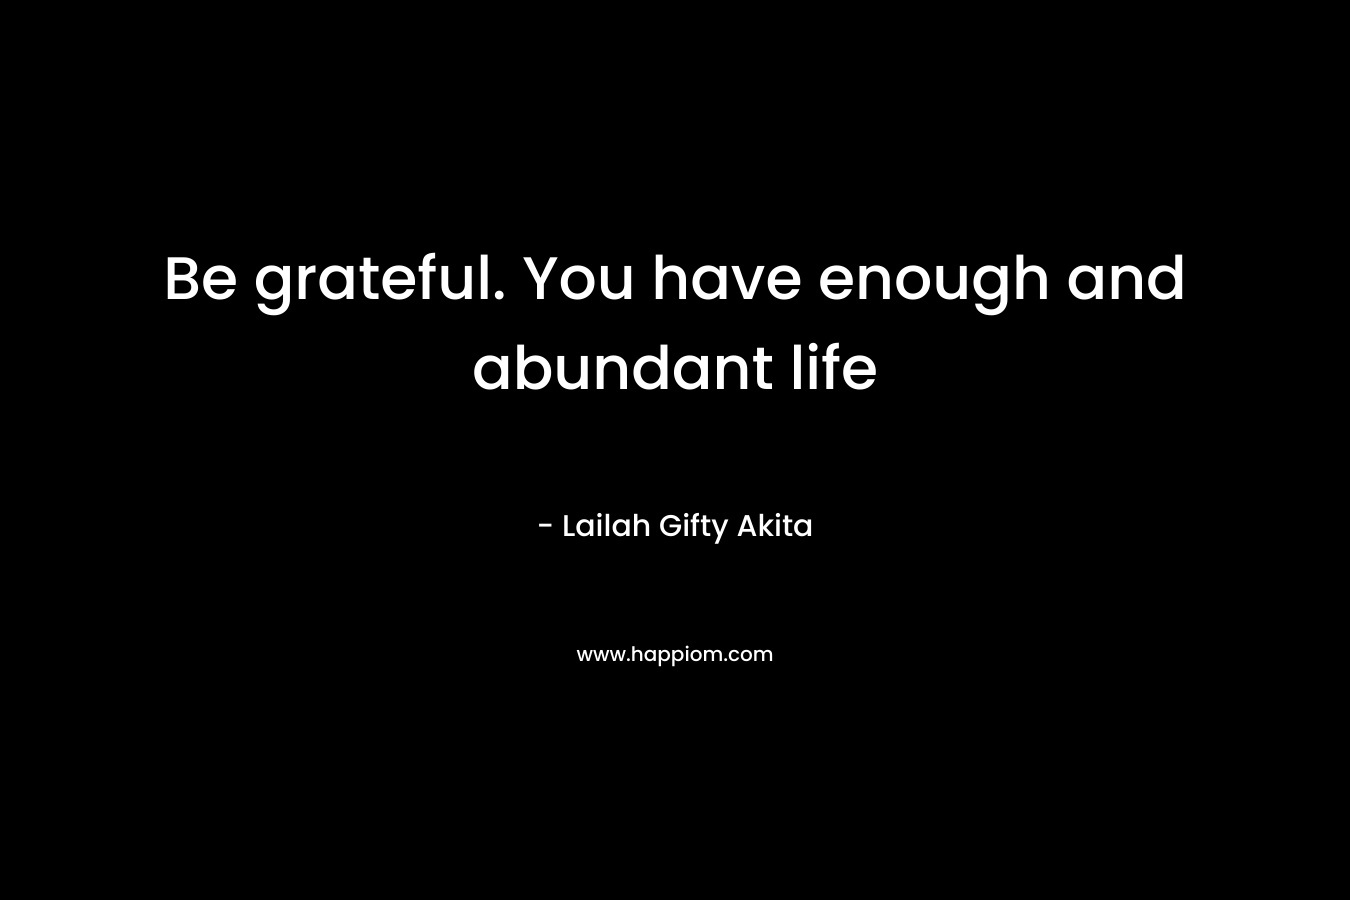 Be grateful. You have enough and abundant life